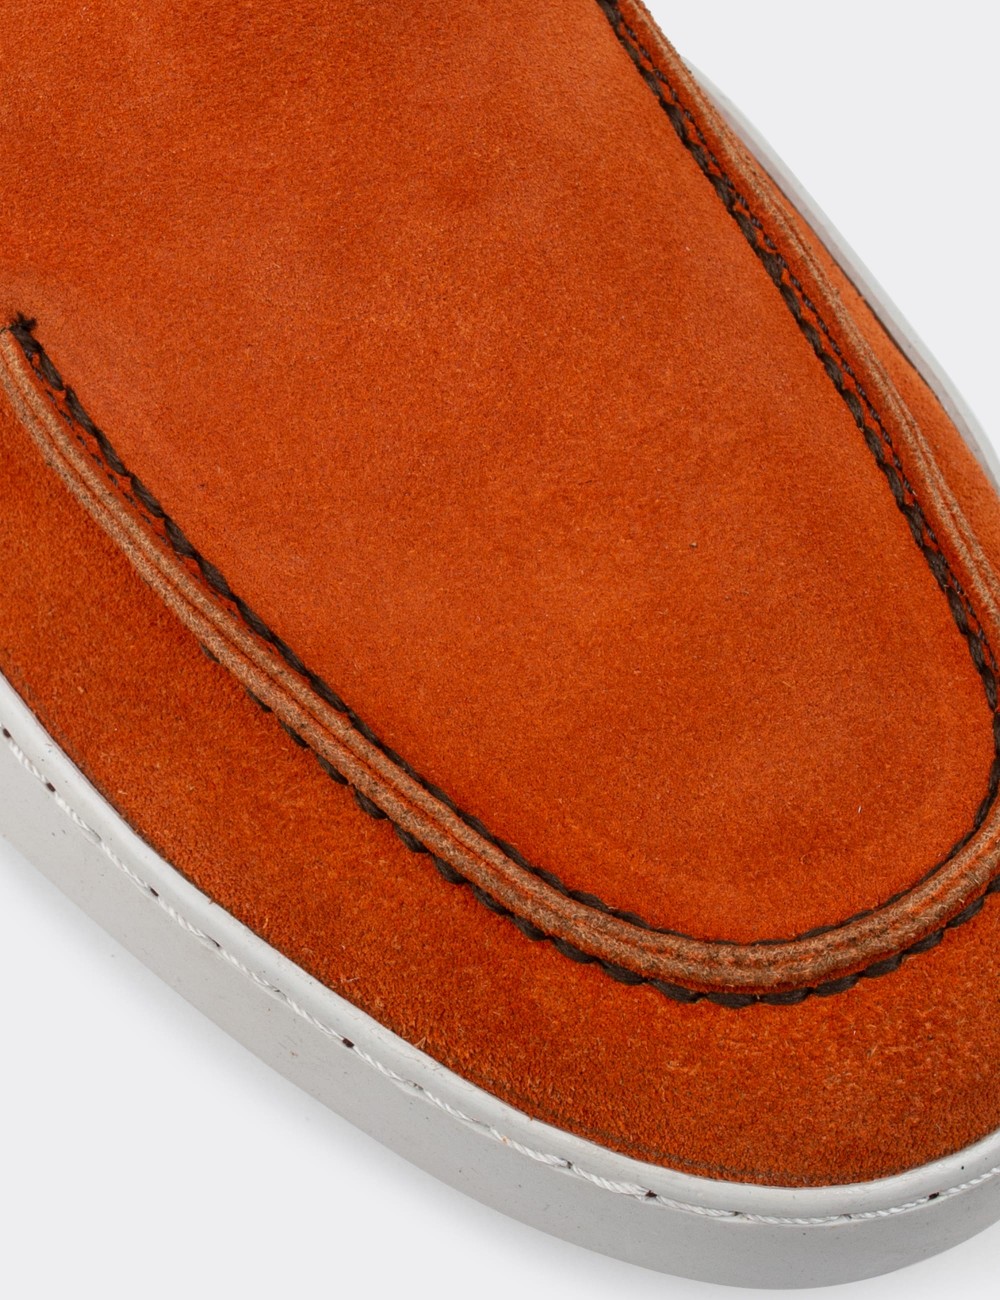 Orange Suede Leather Loafers - 01865MTRCC01